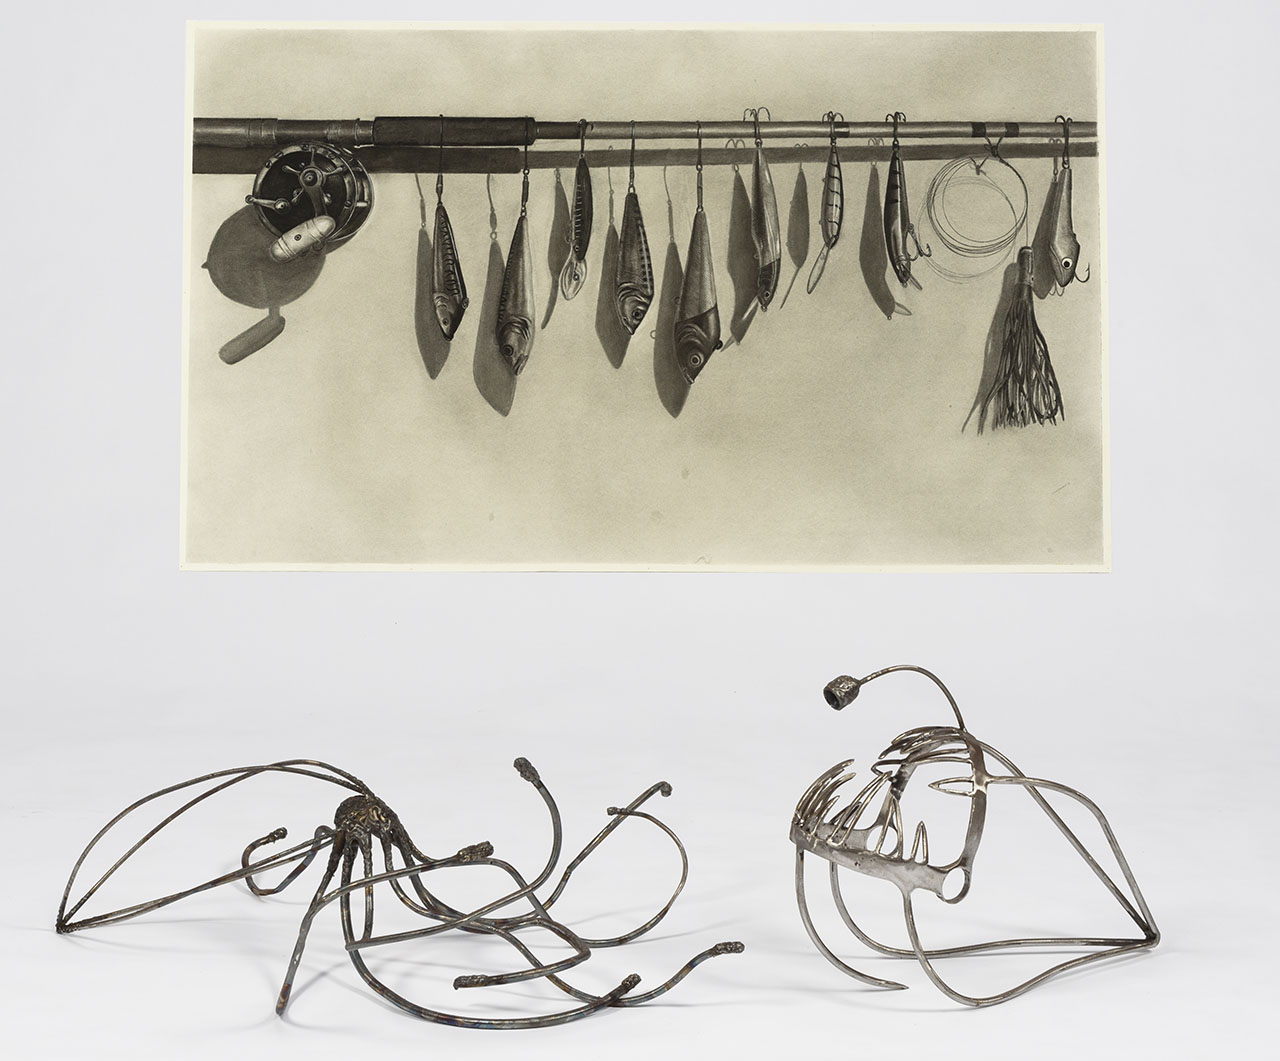 horizontal fishing rod with multiple fish shaped lures hanging down and two abstract metal sea creature sculptures.